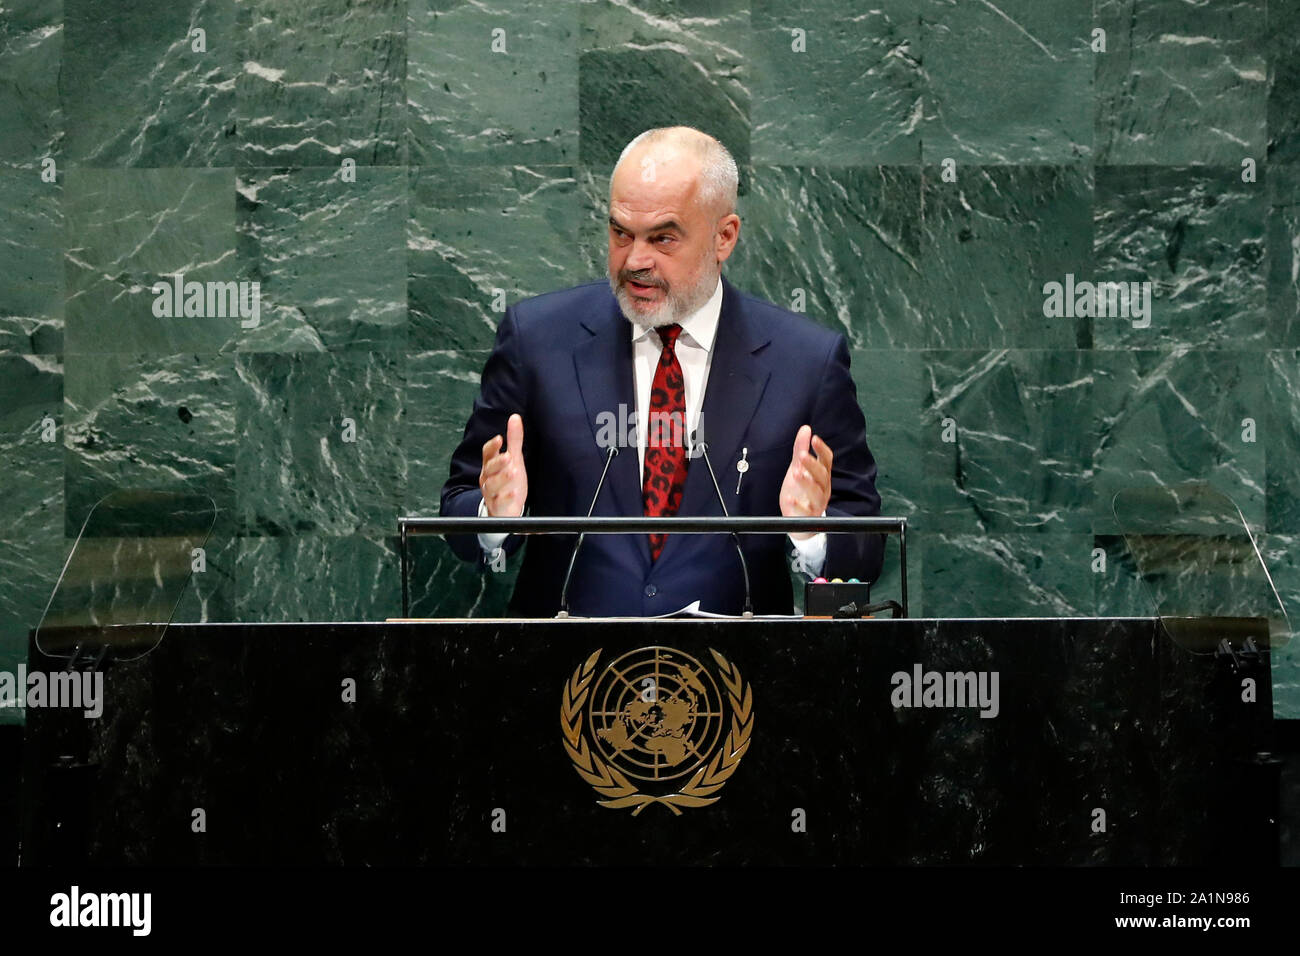 United Nations. 27th Sep, 2019. Albanian Prime Minister Edi Rama addresses the General Debate of the 74th session of the UN General Assembly at the UN headquarters in New York, Sept. 27, 2019. Credit: Li Muzi/Xinhua/Alamy Live News Stock Photo